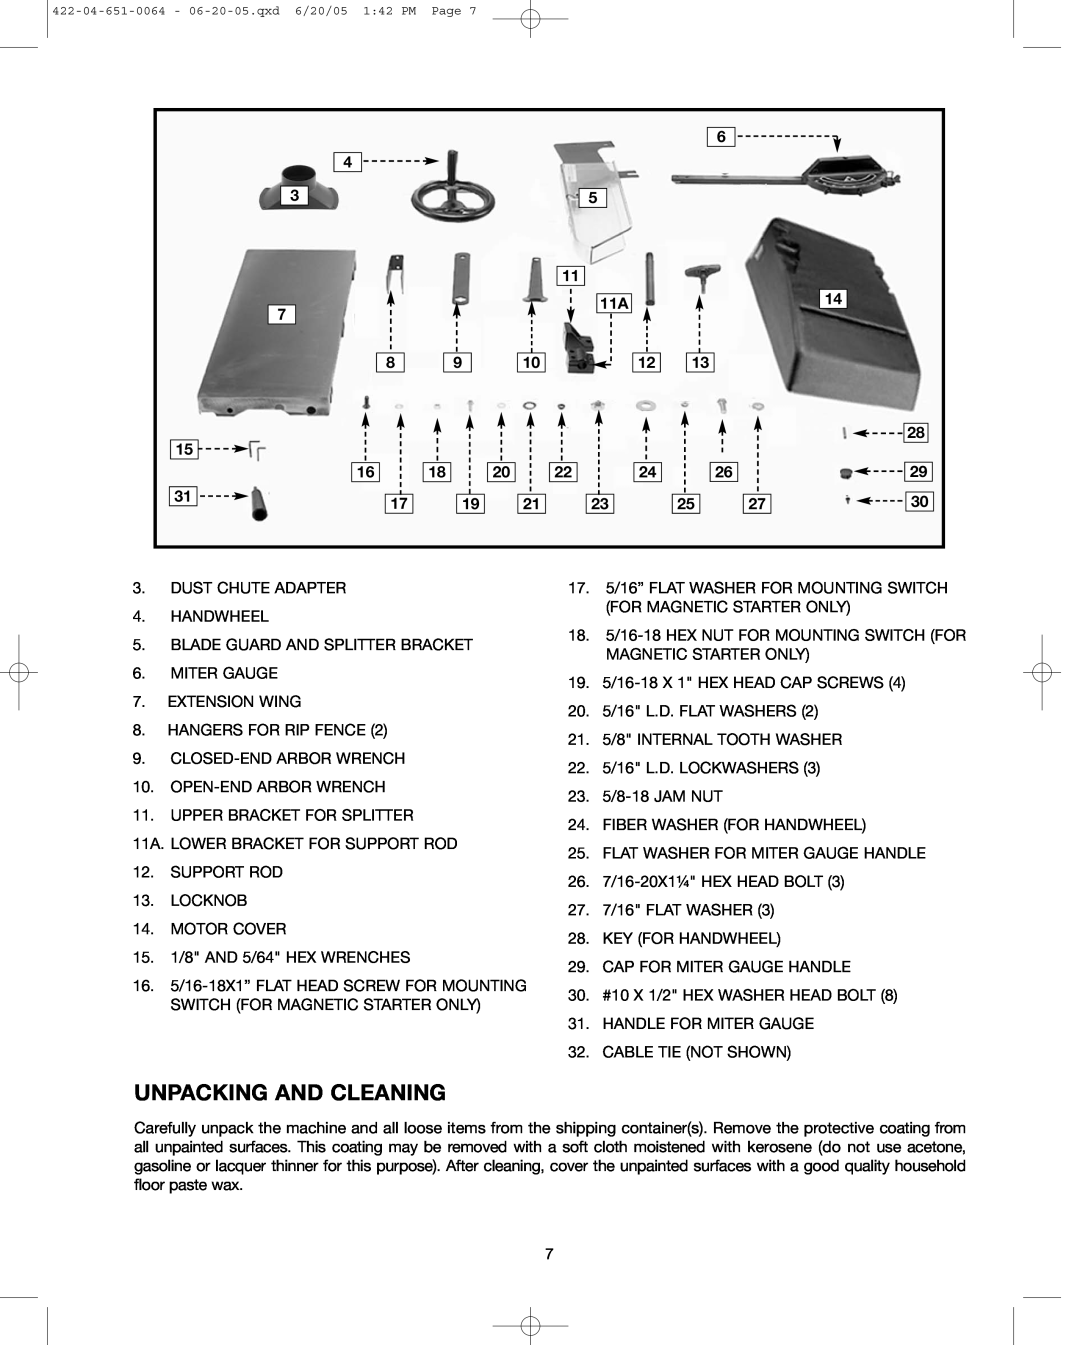 Delta 34-806, 34-814, 34-801 instruction manual Unpacking And Cleaning 